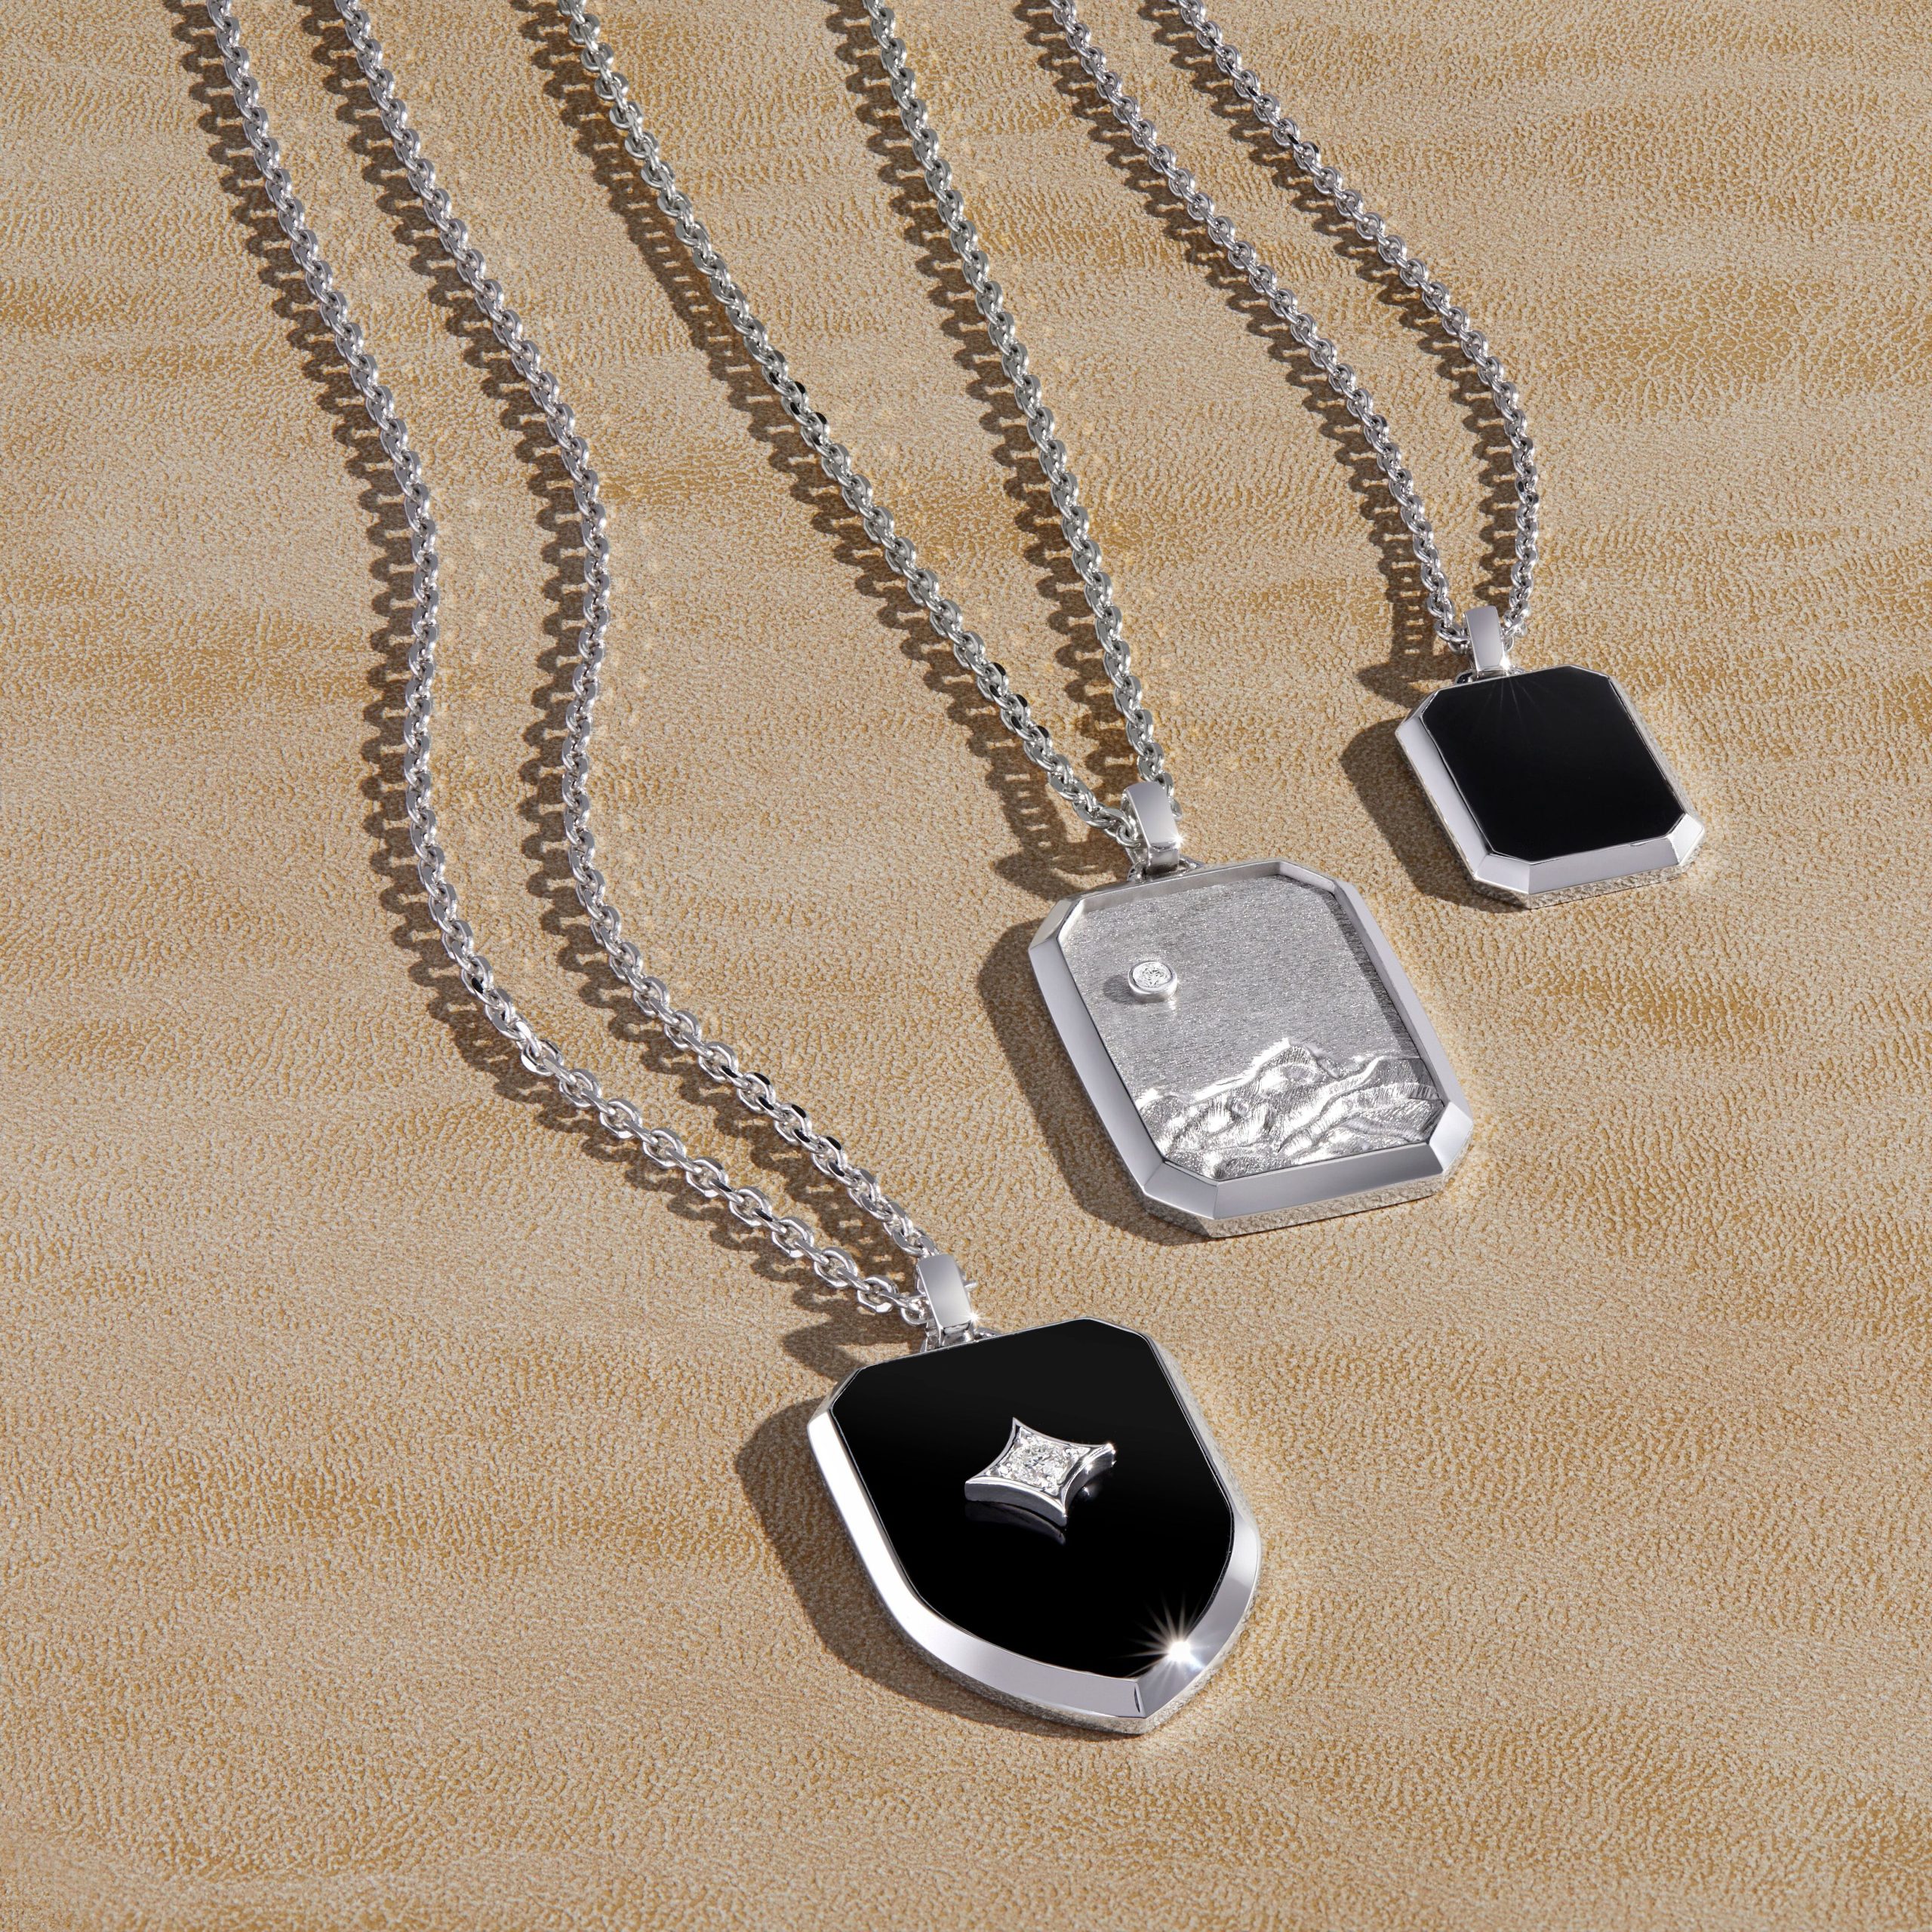 Men's White Gold Chain Necklaces with Black Onyx